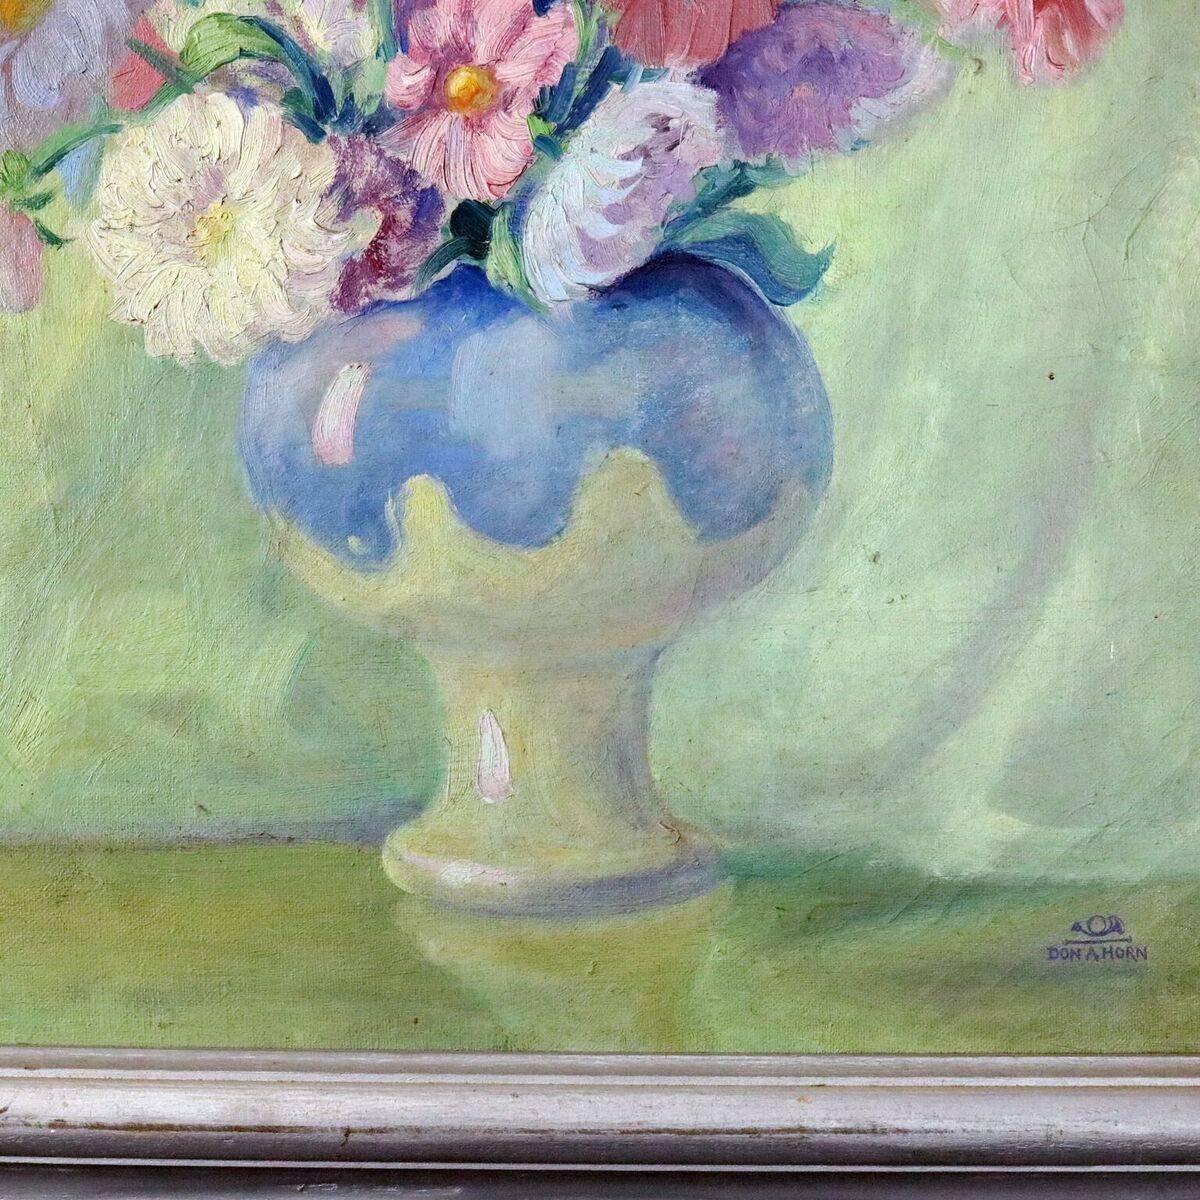 American Antique Arts & Crafts Style Still Floral Still Life Oil on Canvas by Don A. Horn